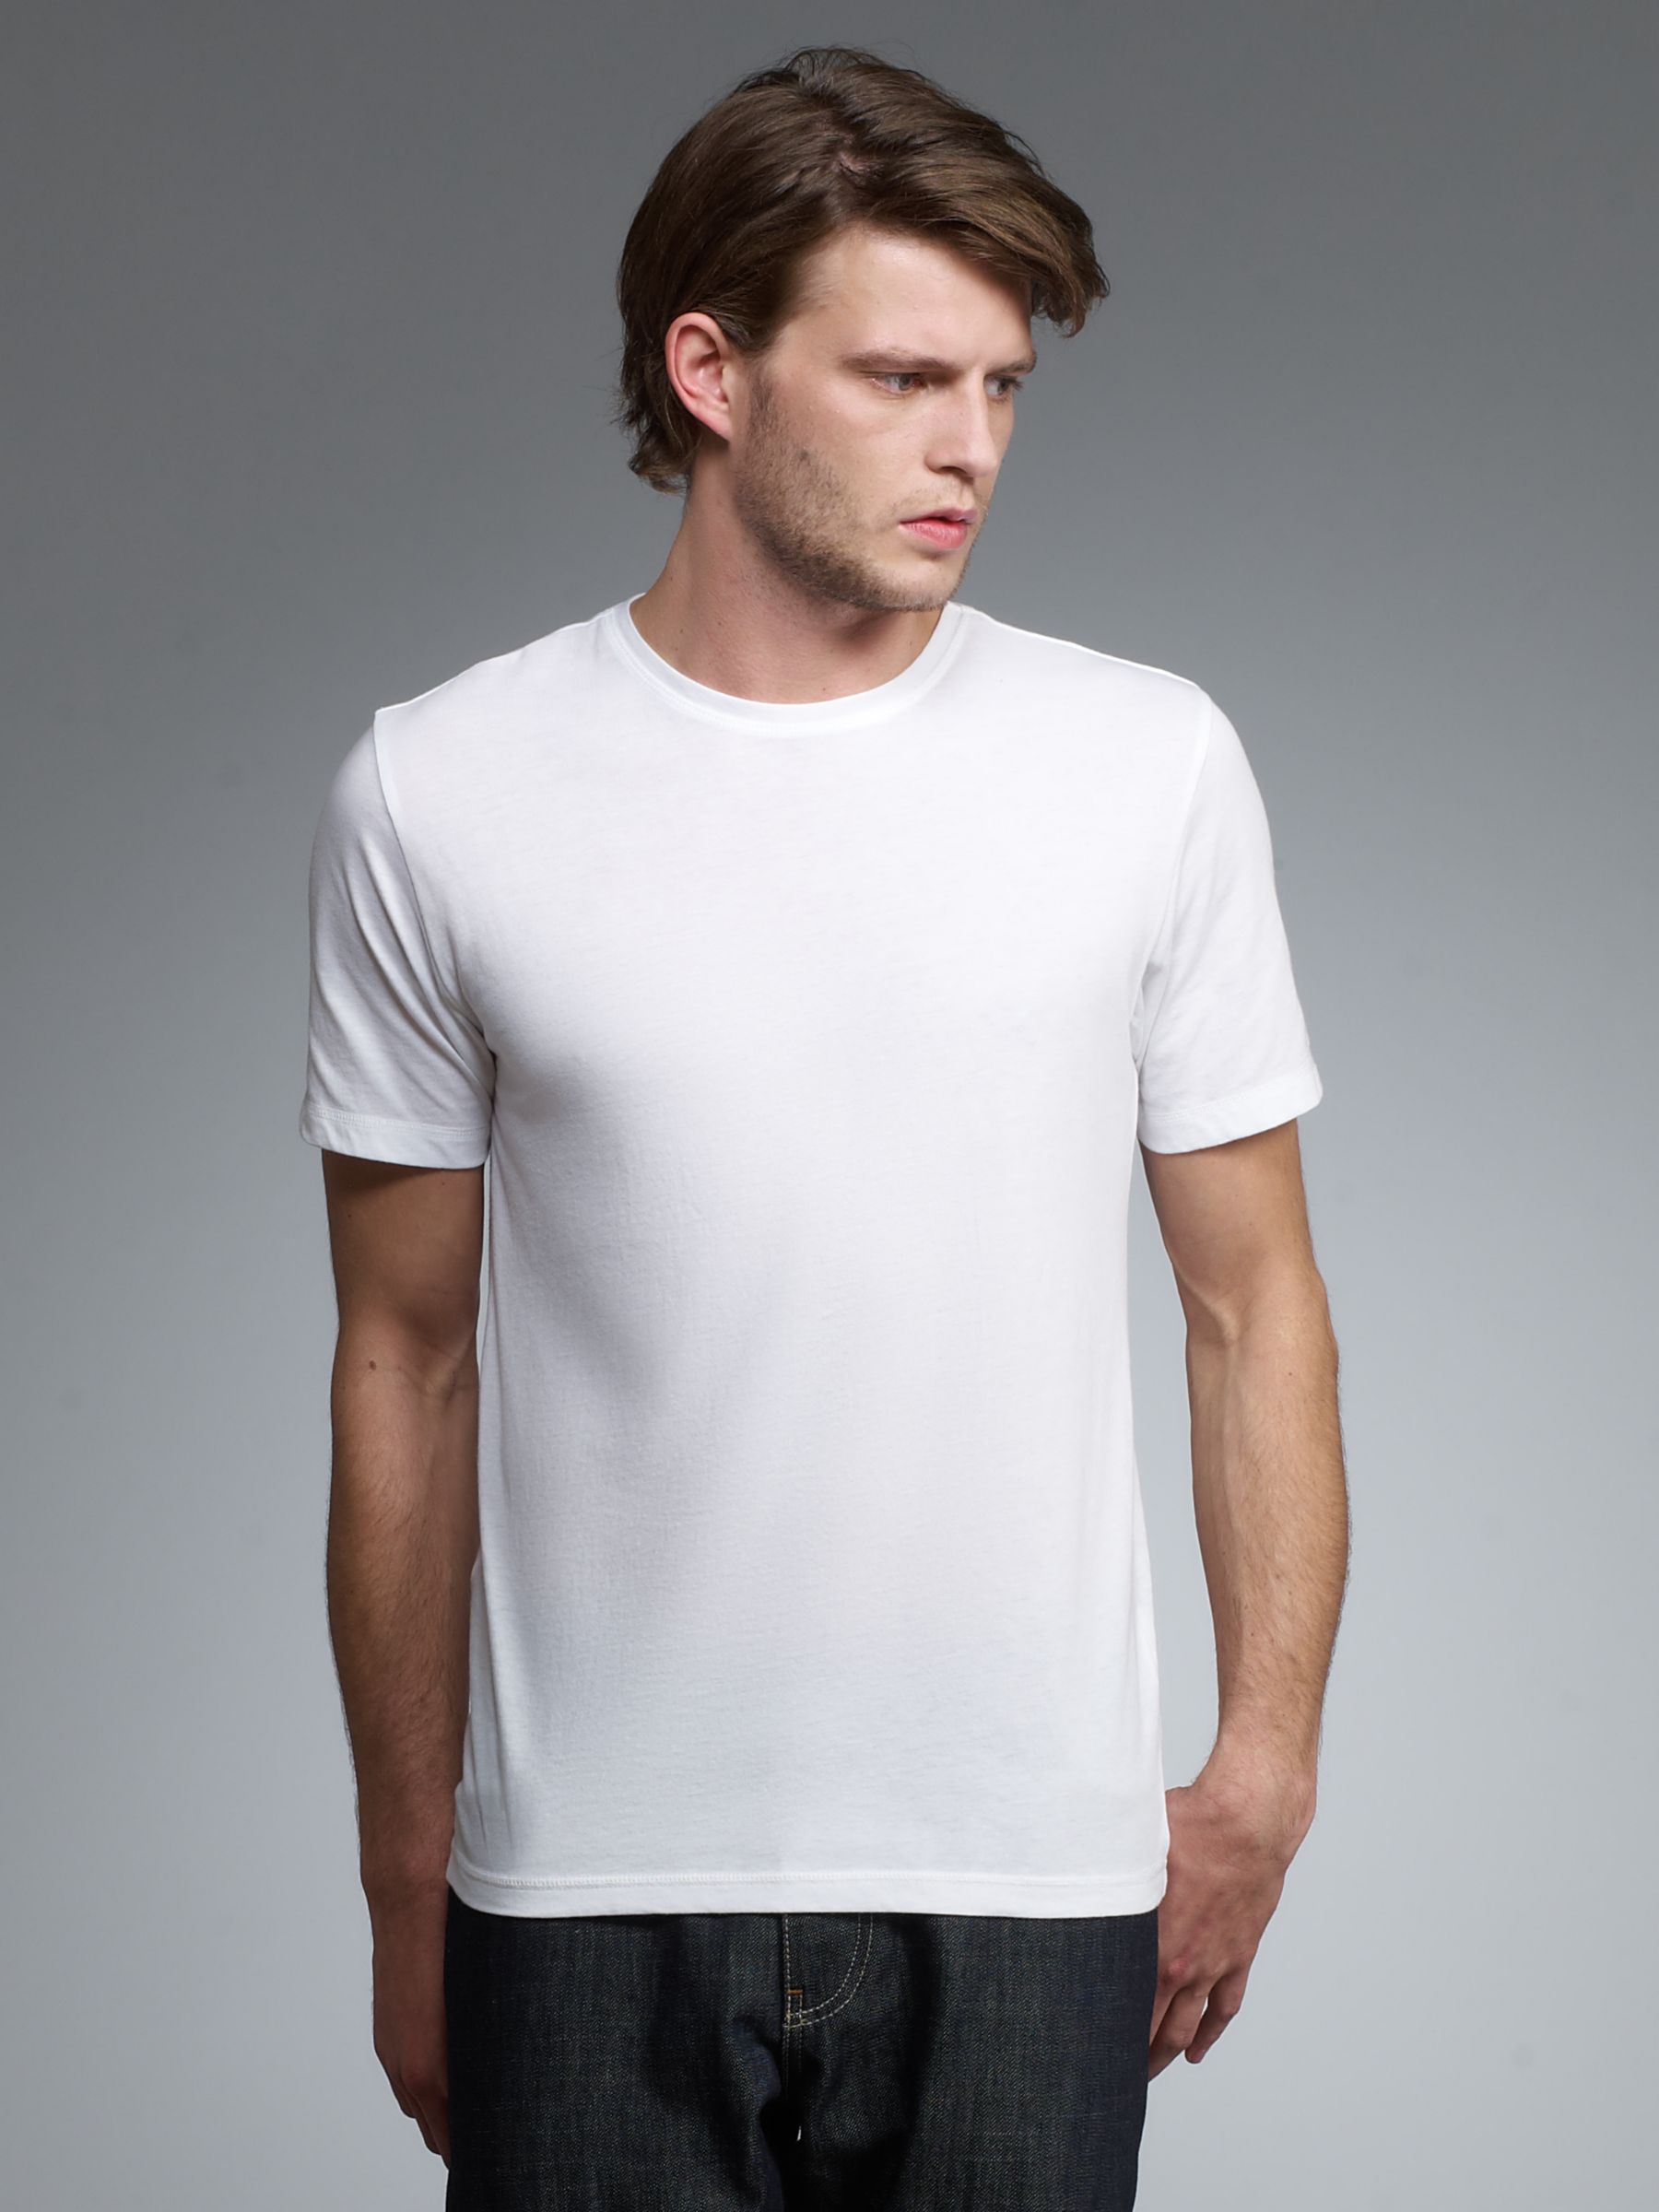 JOHN LEWIS and Co. Heritage Crew Neck T-Shirt,